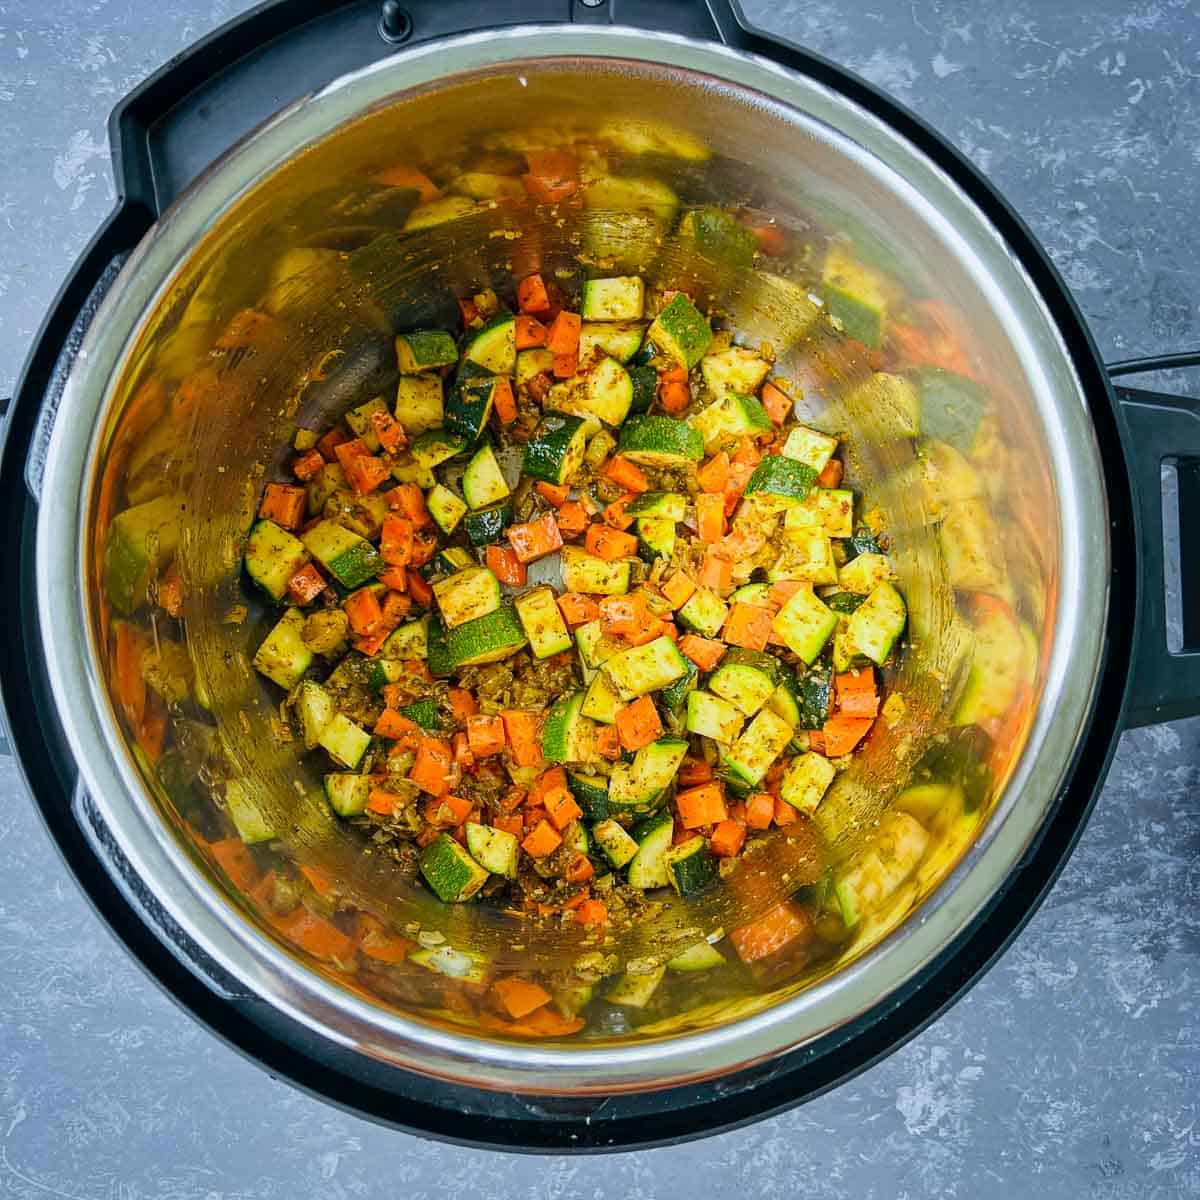 Sauted veggies and seasoning in Instant Pot.